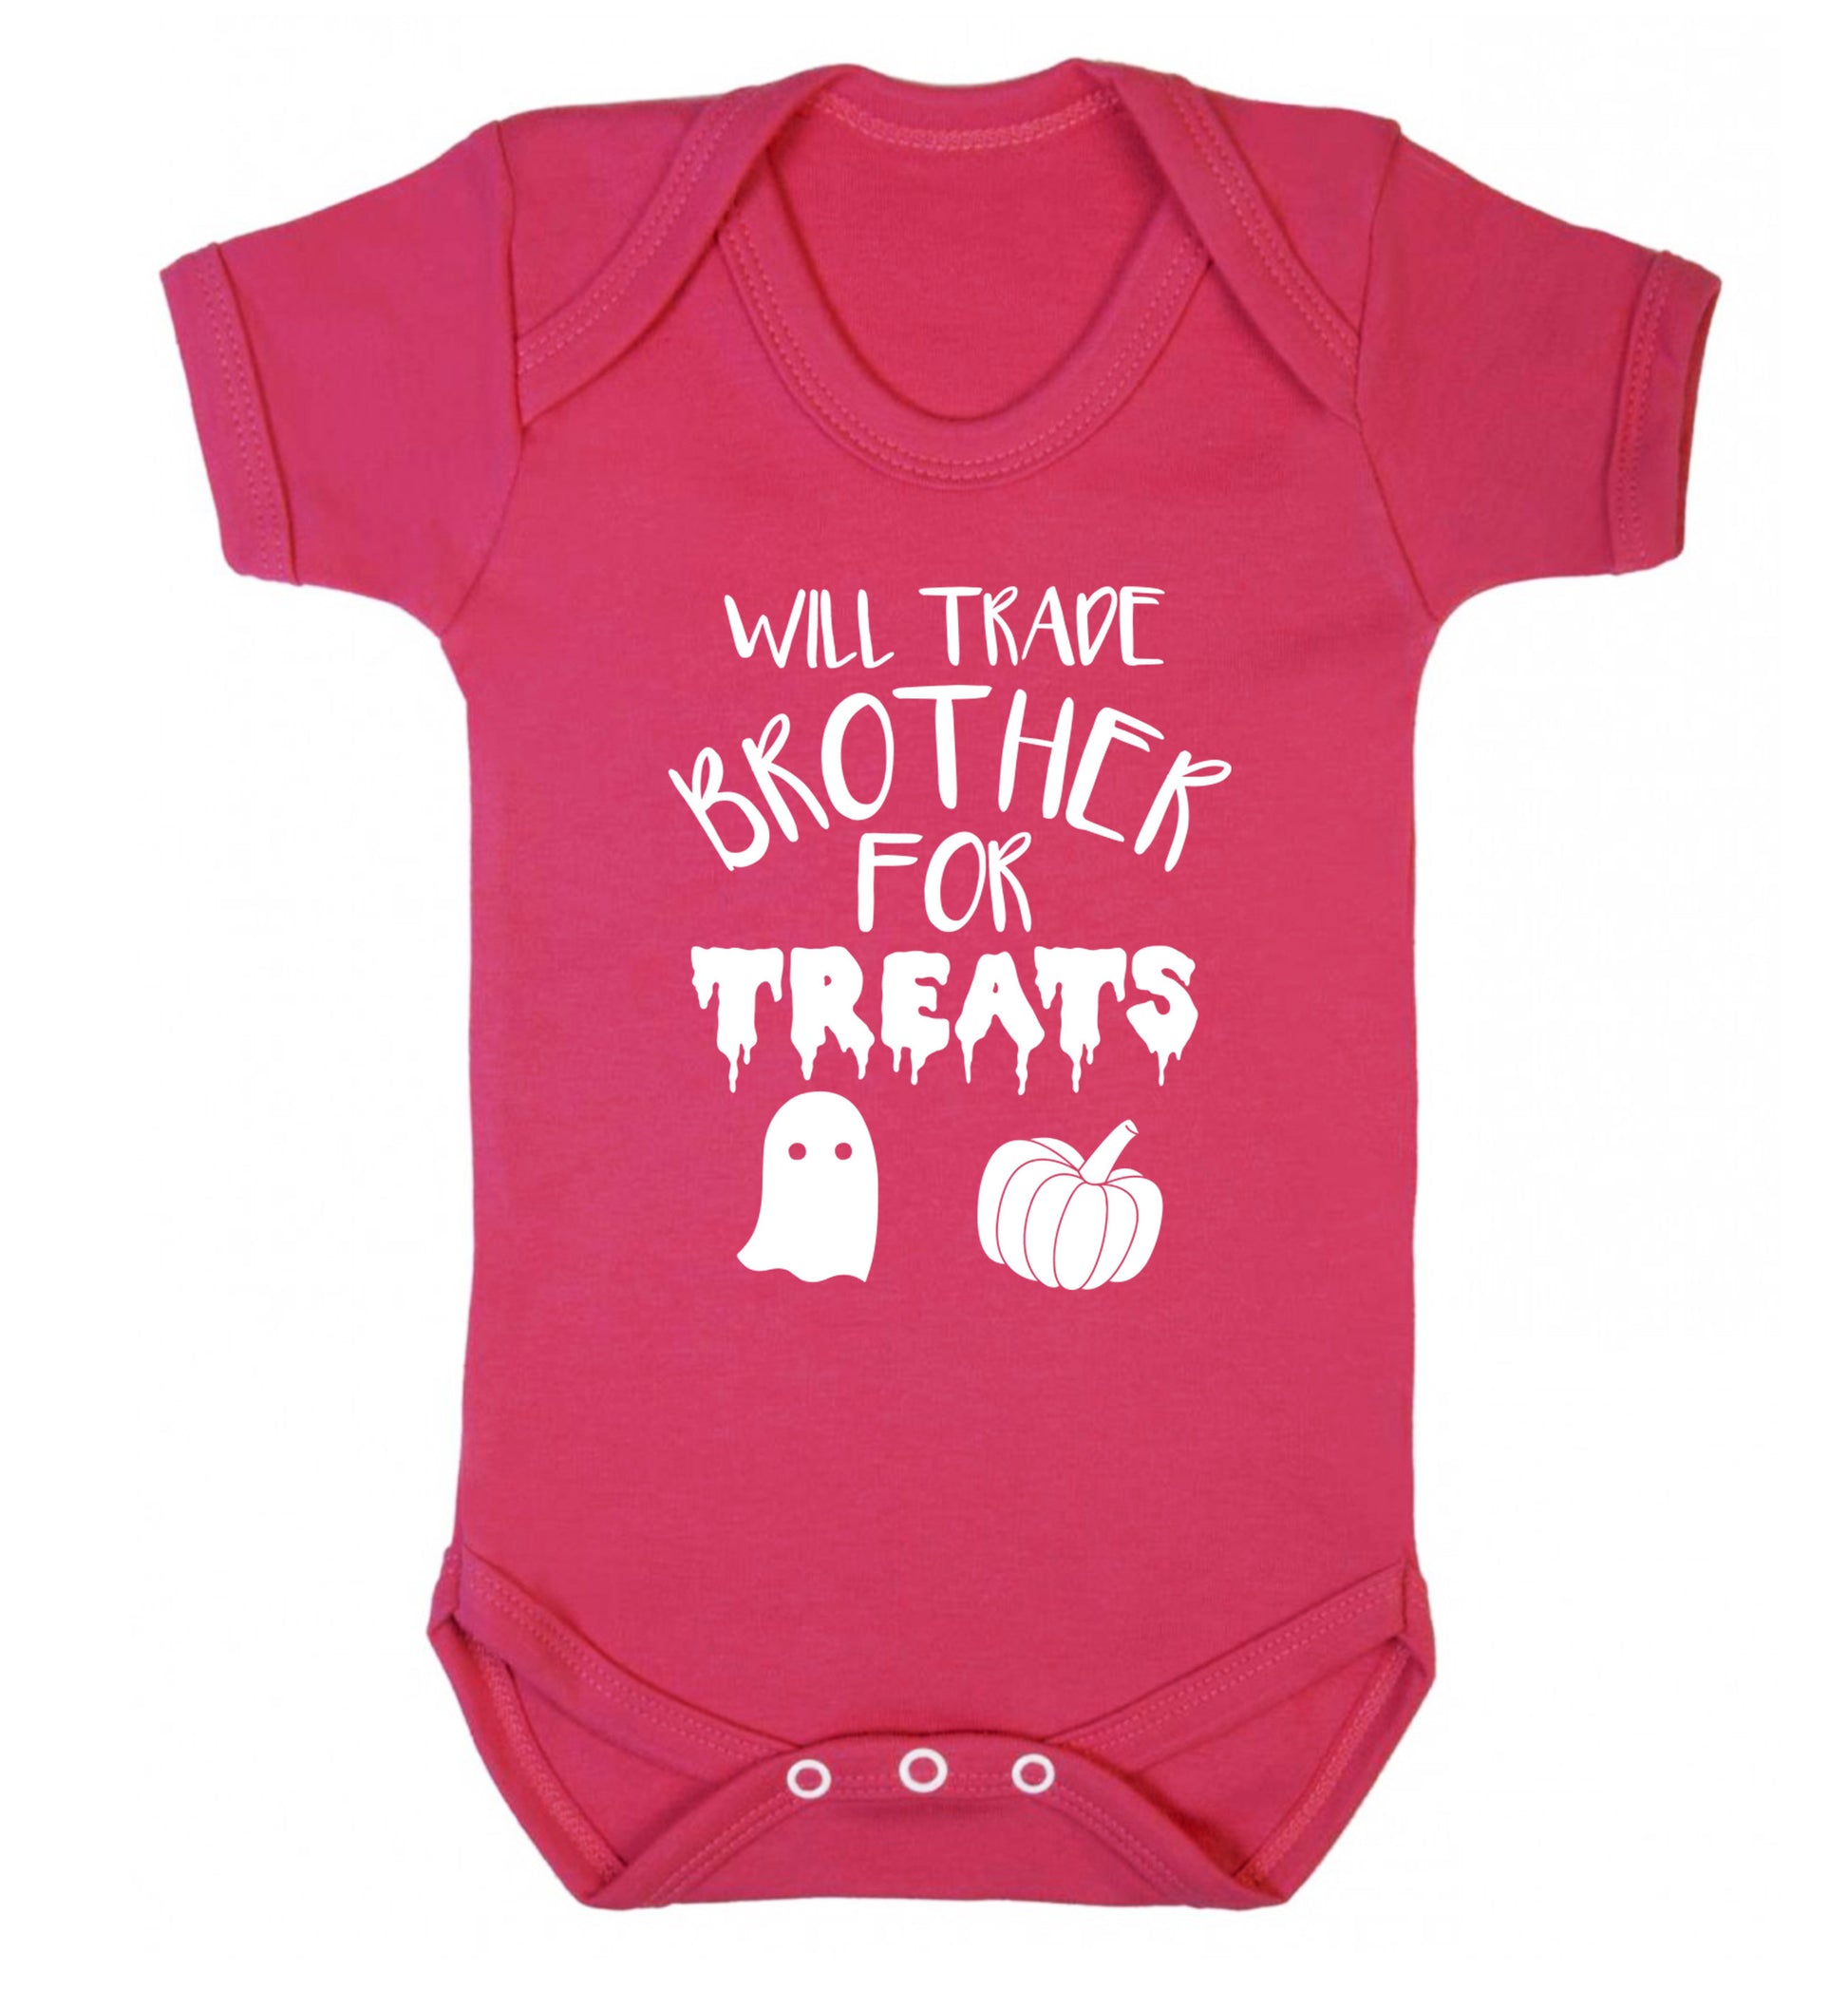 Will trade brother for treats Baby Vest dark pink 18-24 months